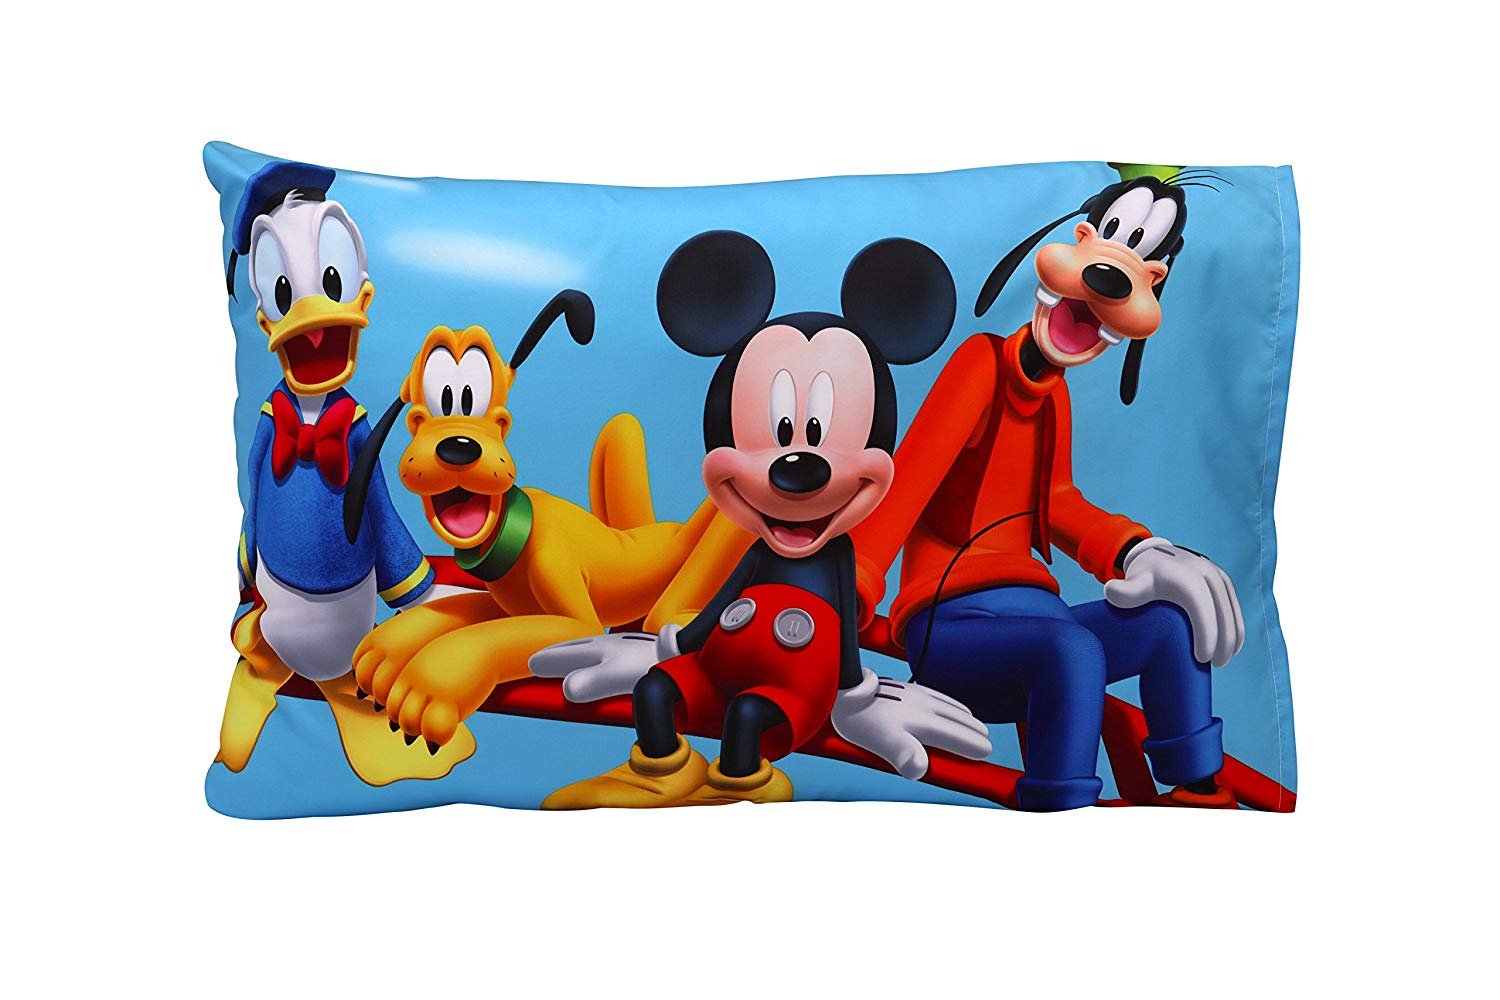 Disney Mickey Mouse Clubhouse Toddler Sheet Set - image 4 of 5